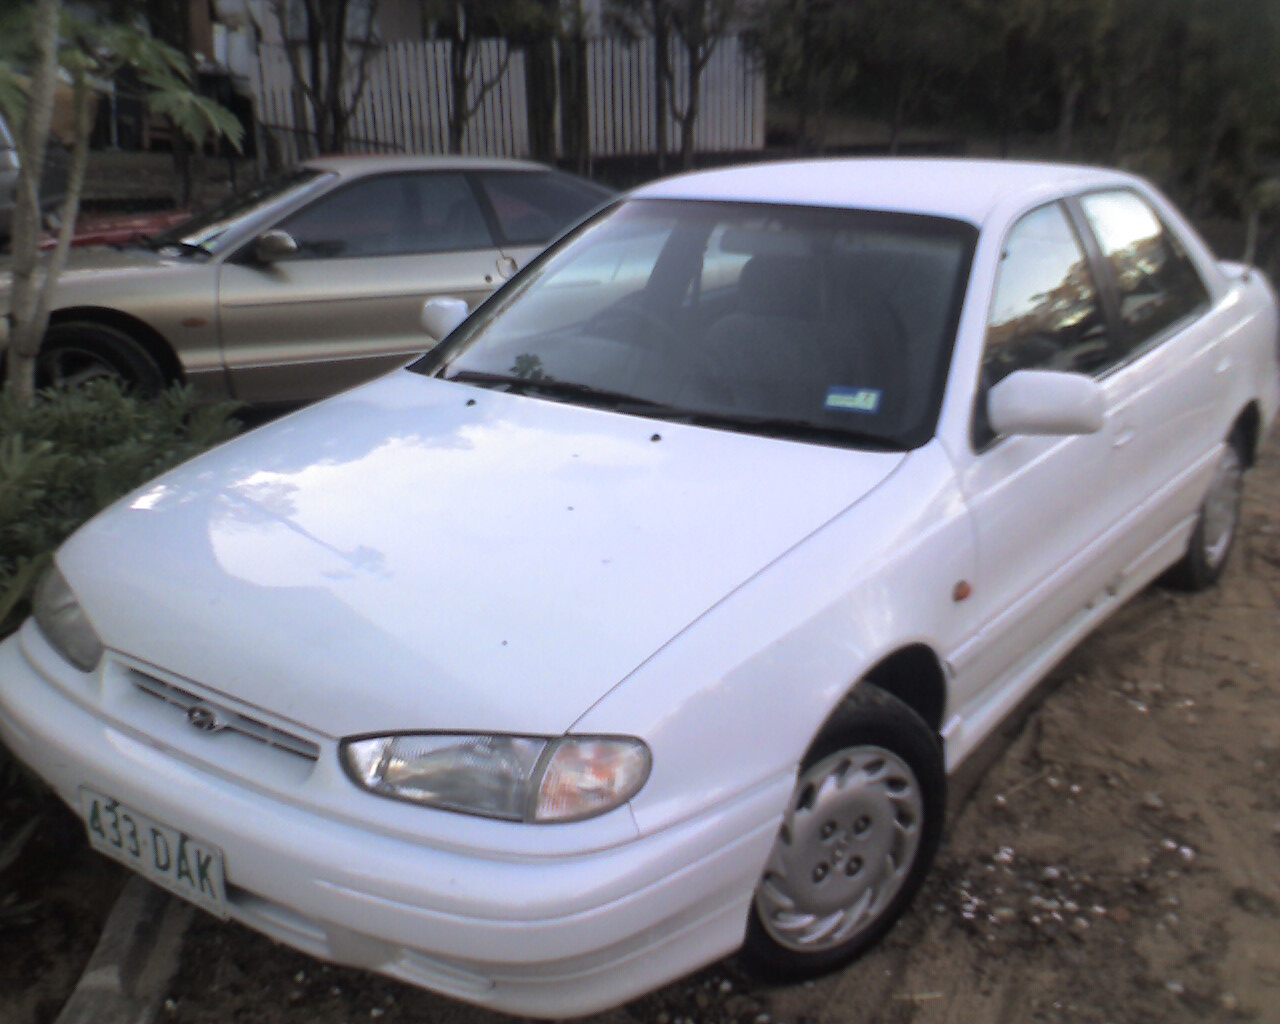 Hyundai Accent 1993 Review, Amazing Pictures and Images